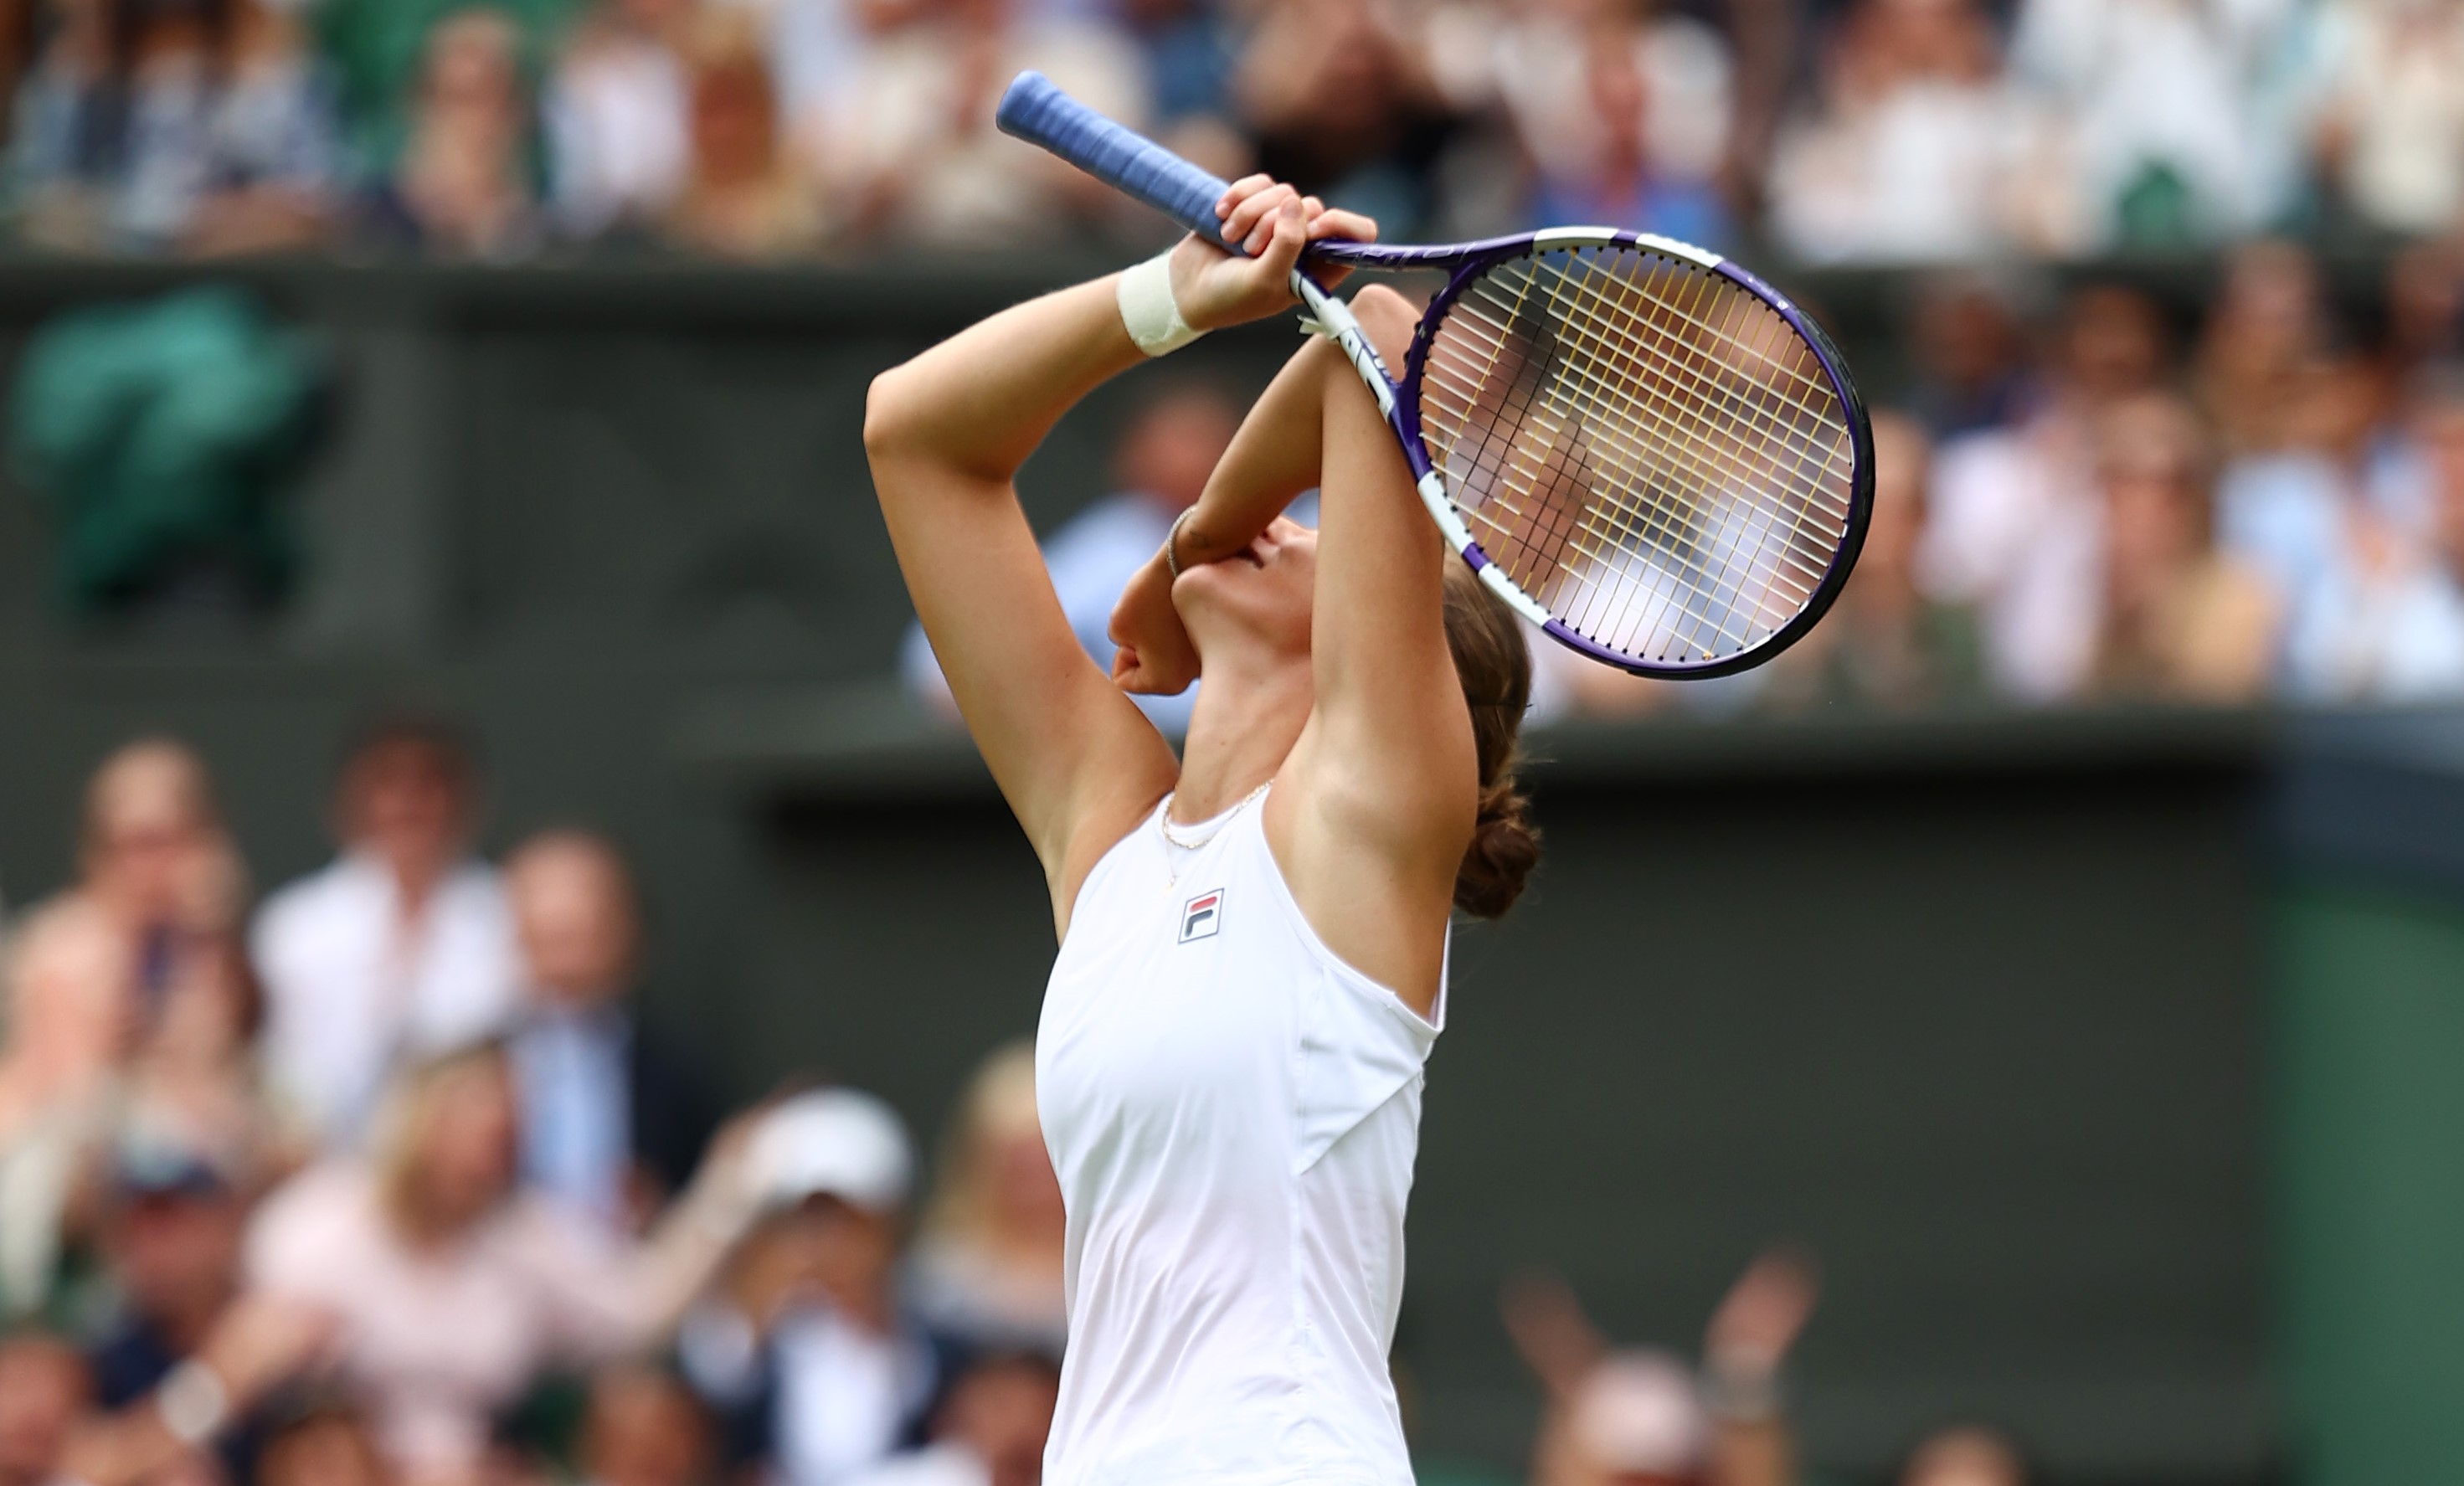 Wimbledon 2021 LIVE Watch Barty, Kerber and Pliskova and follow scores, commentary and updates - Live